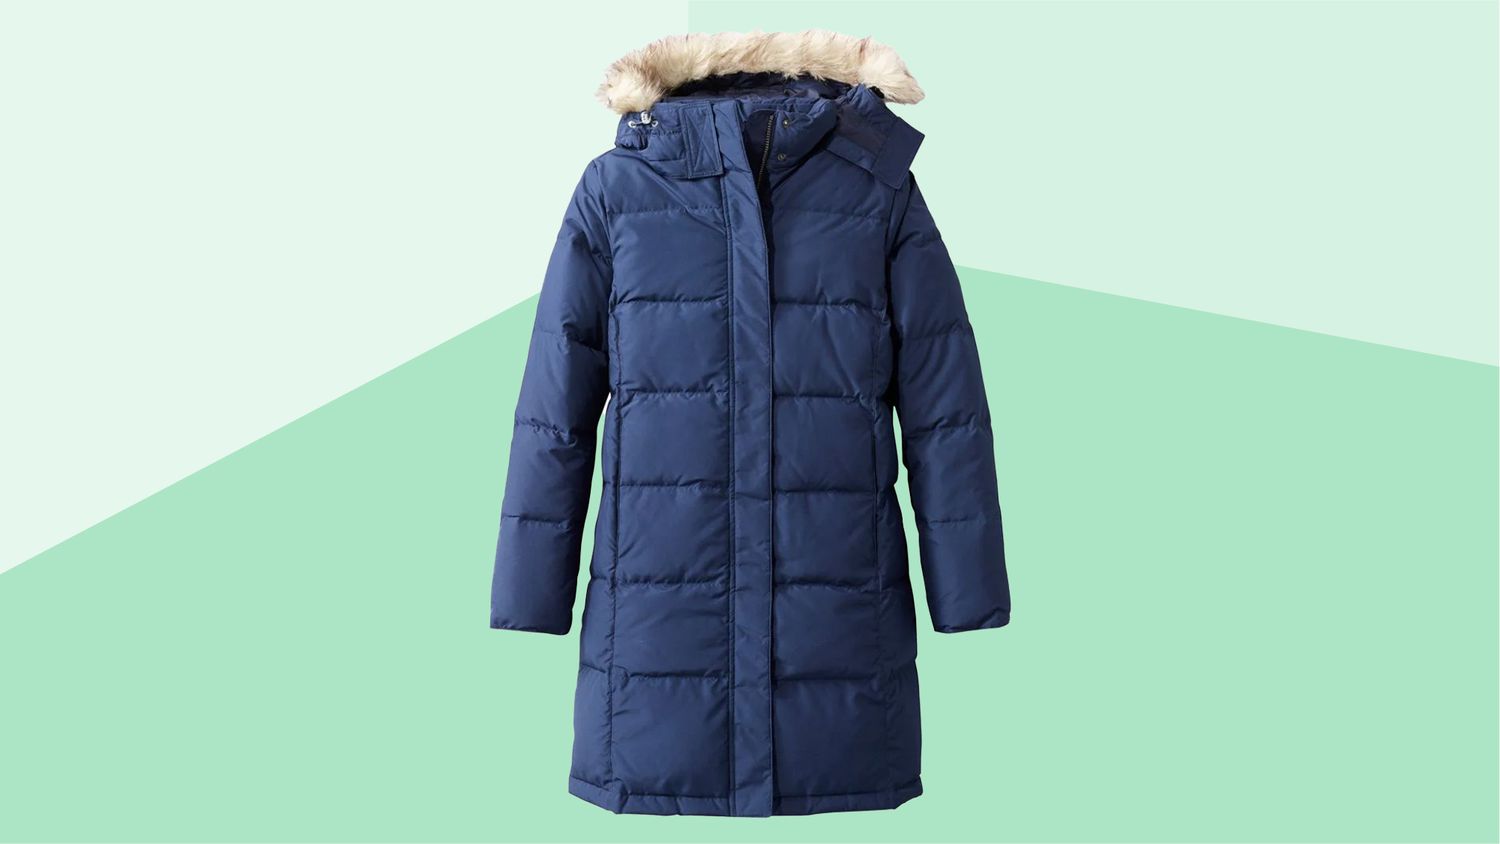 Metallic Quilted Frost-Free Vest for Girls!